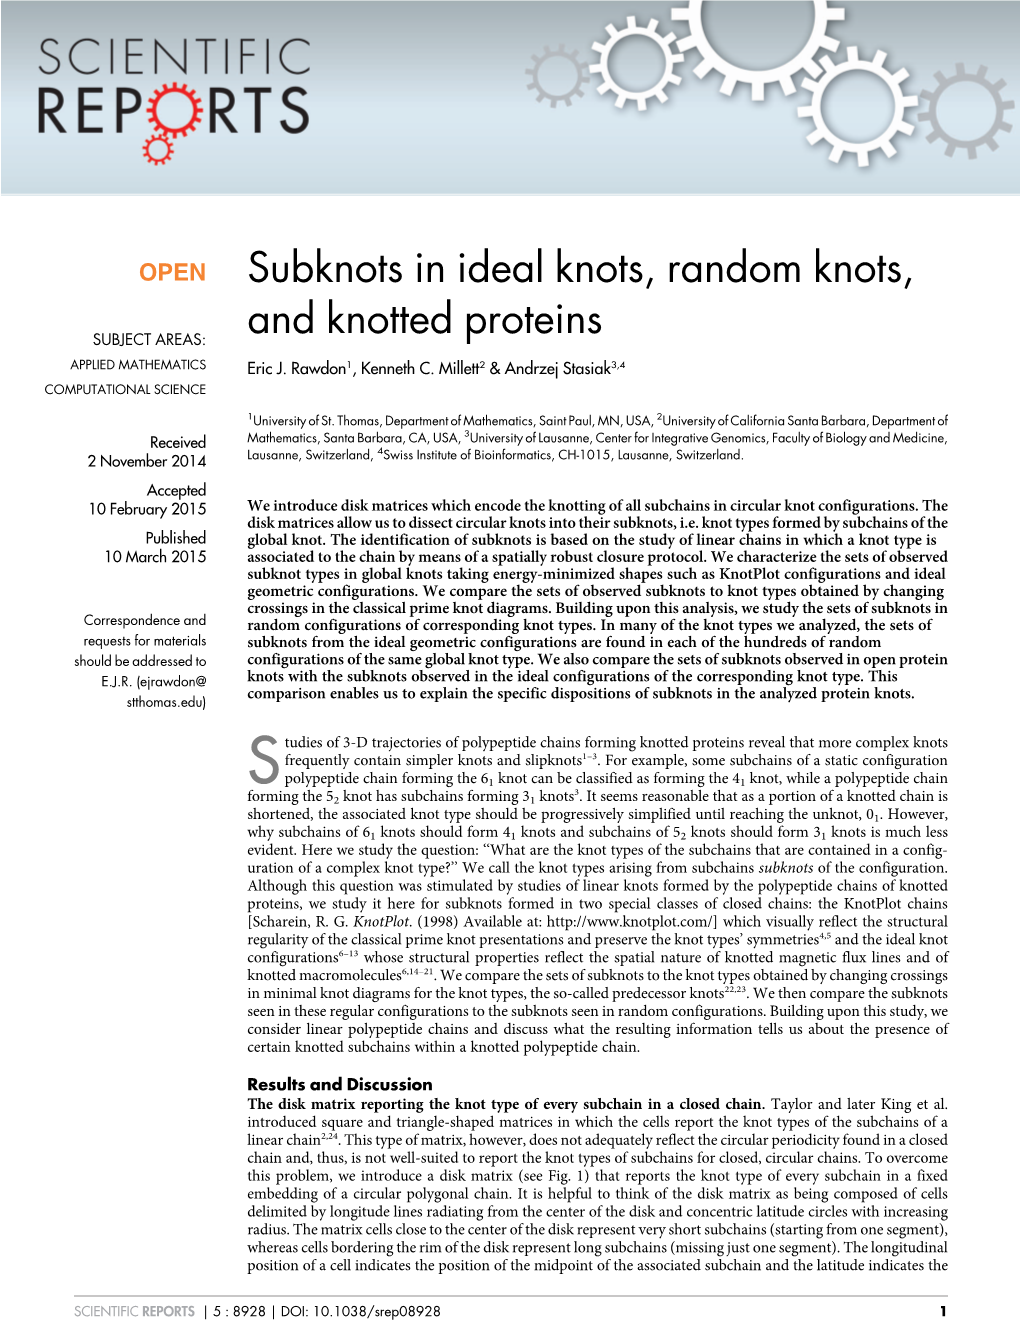 Subknots in Ideal Knots, Random Knots, and Knotted Proteins